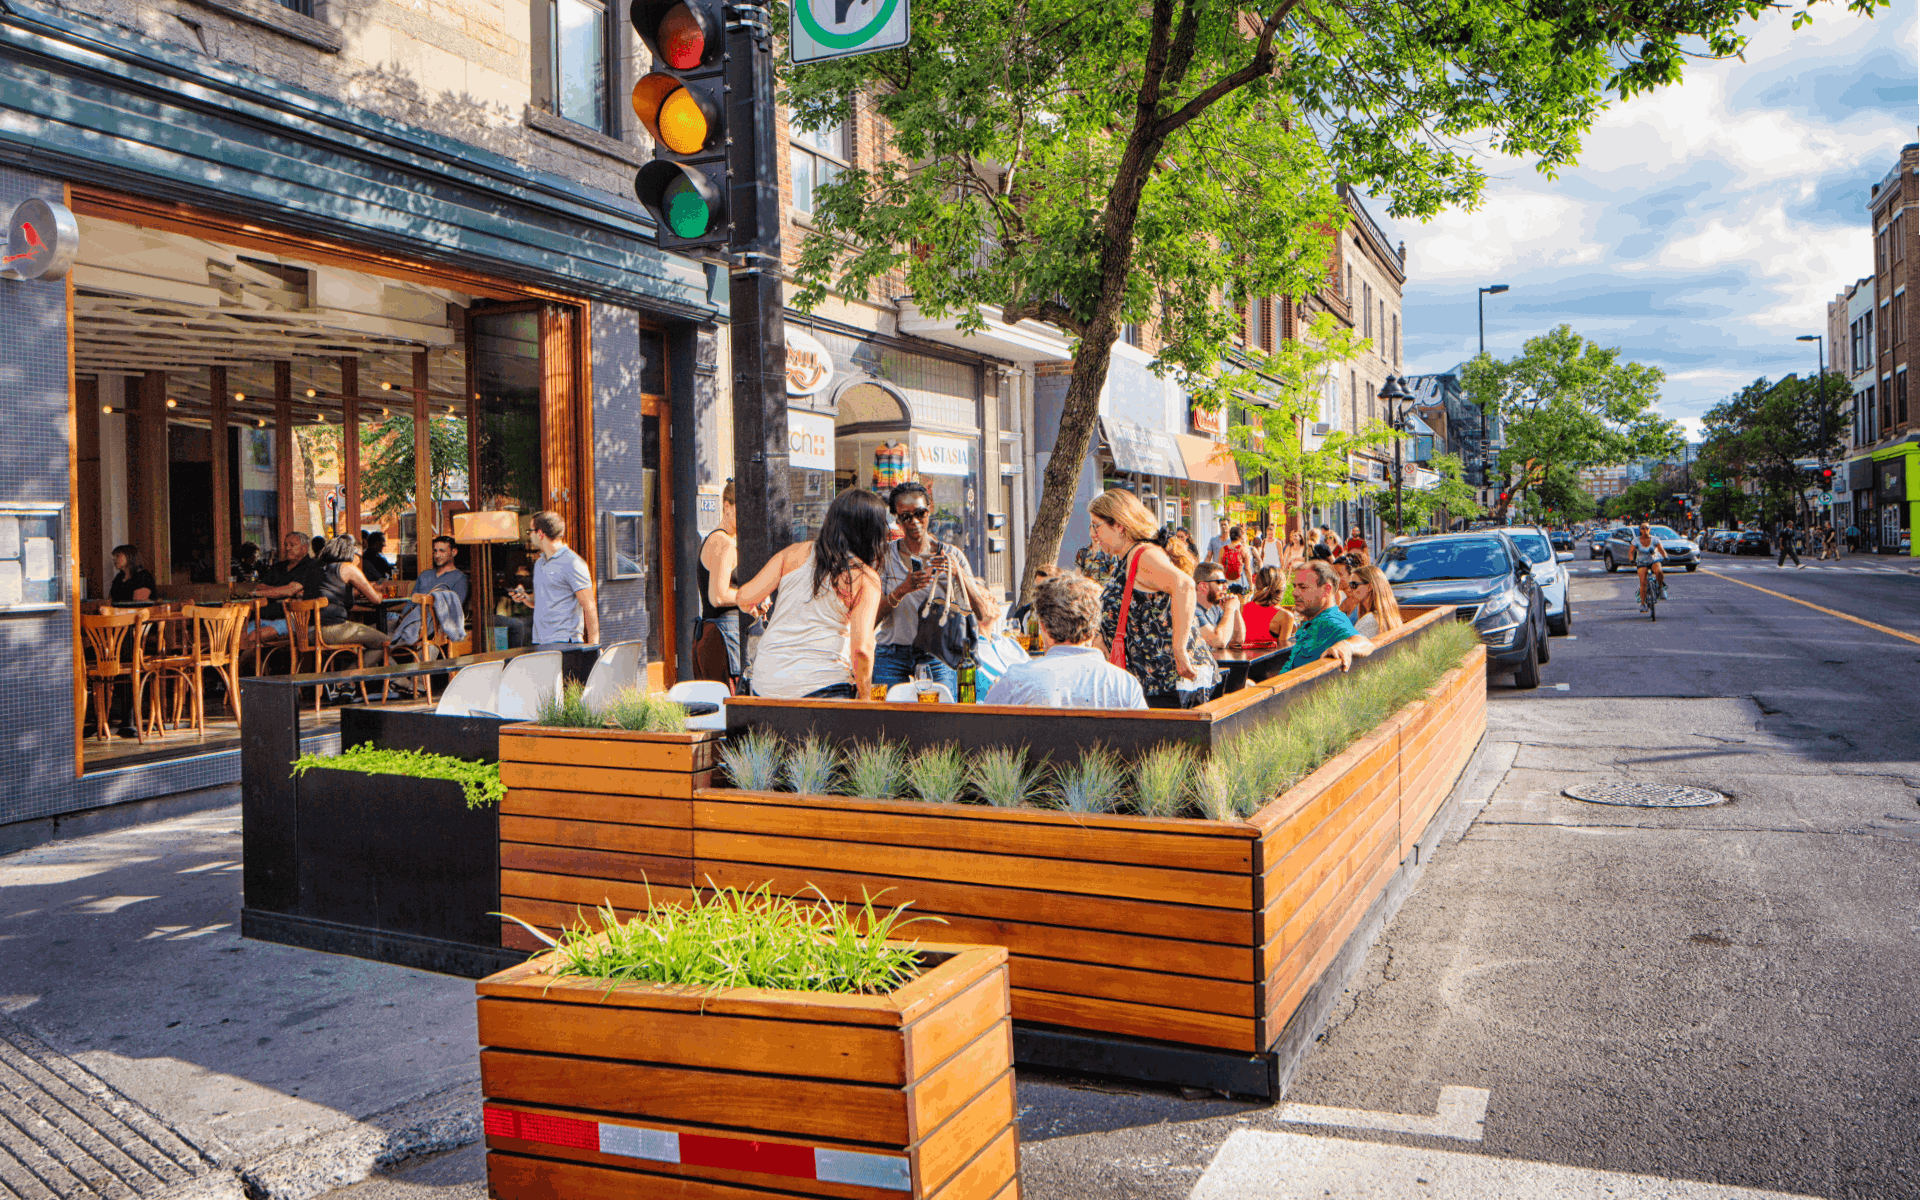 People enjoy themselves at a sidewalk cafe on Mont Royal Avenue in Montreal